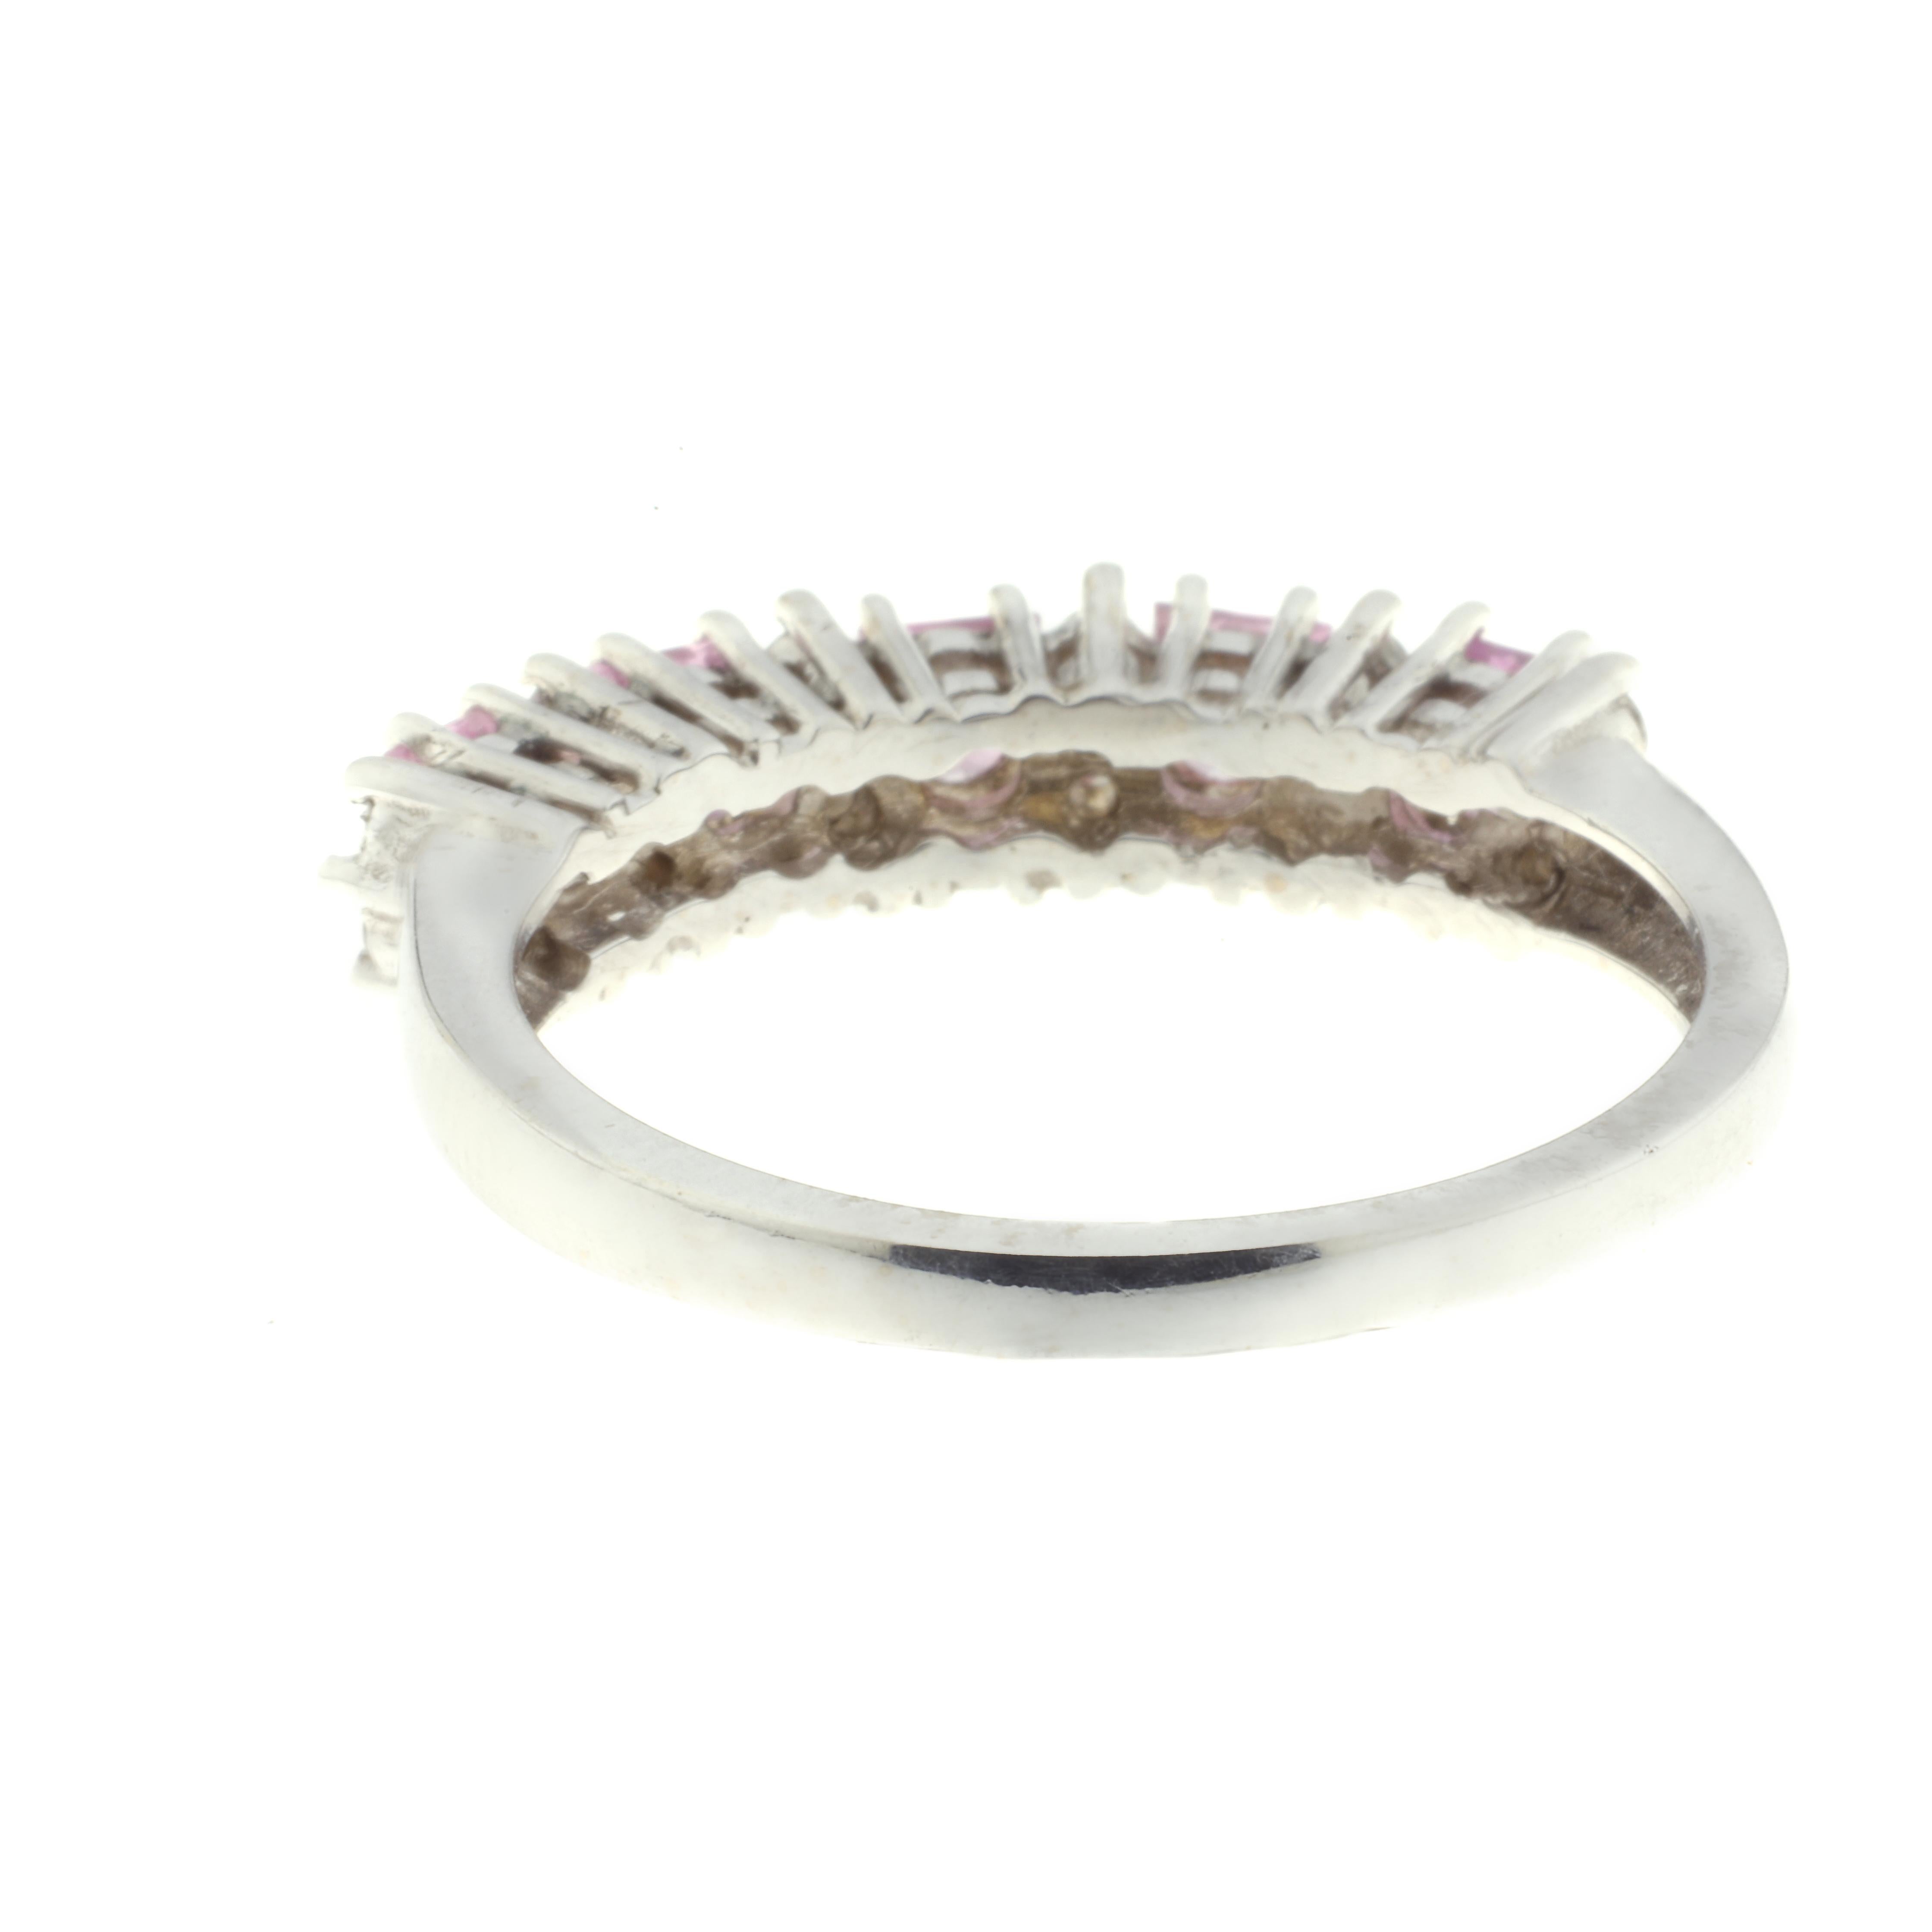 Brilliant Cut 21st Century 18 Karat White Gold Diamond and Pink Sapphire Ring For Sale